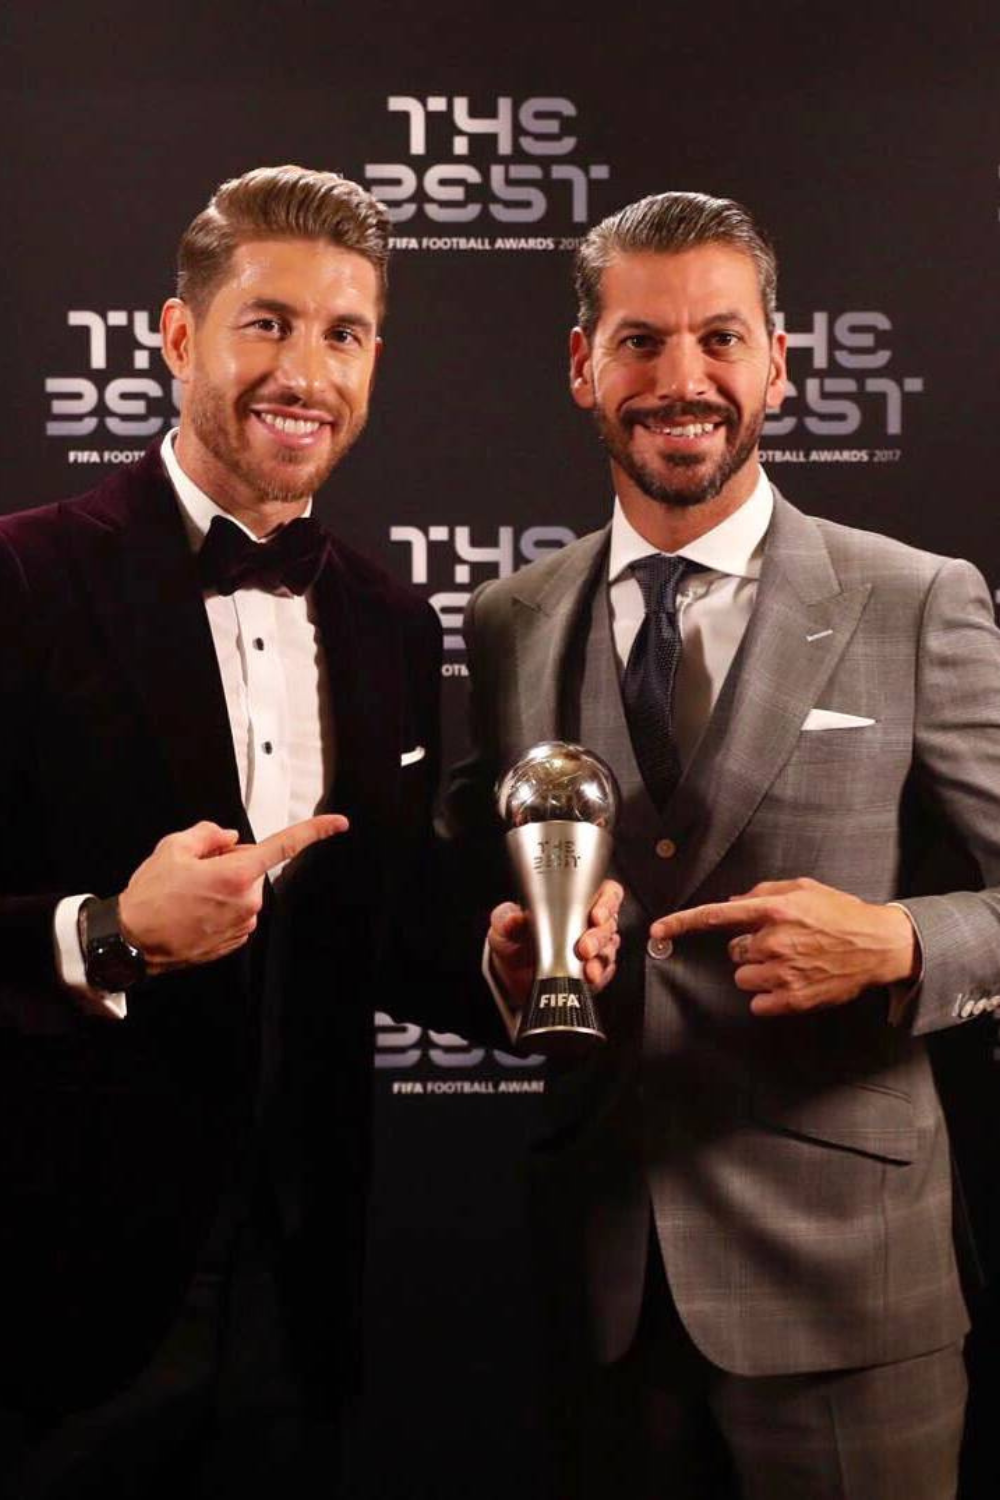 Sergio Ramos With His Brother (Source: Instagram)